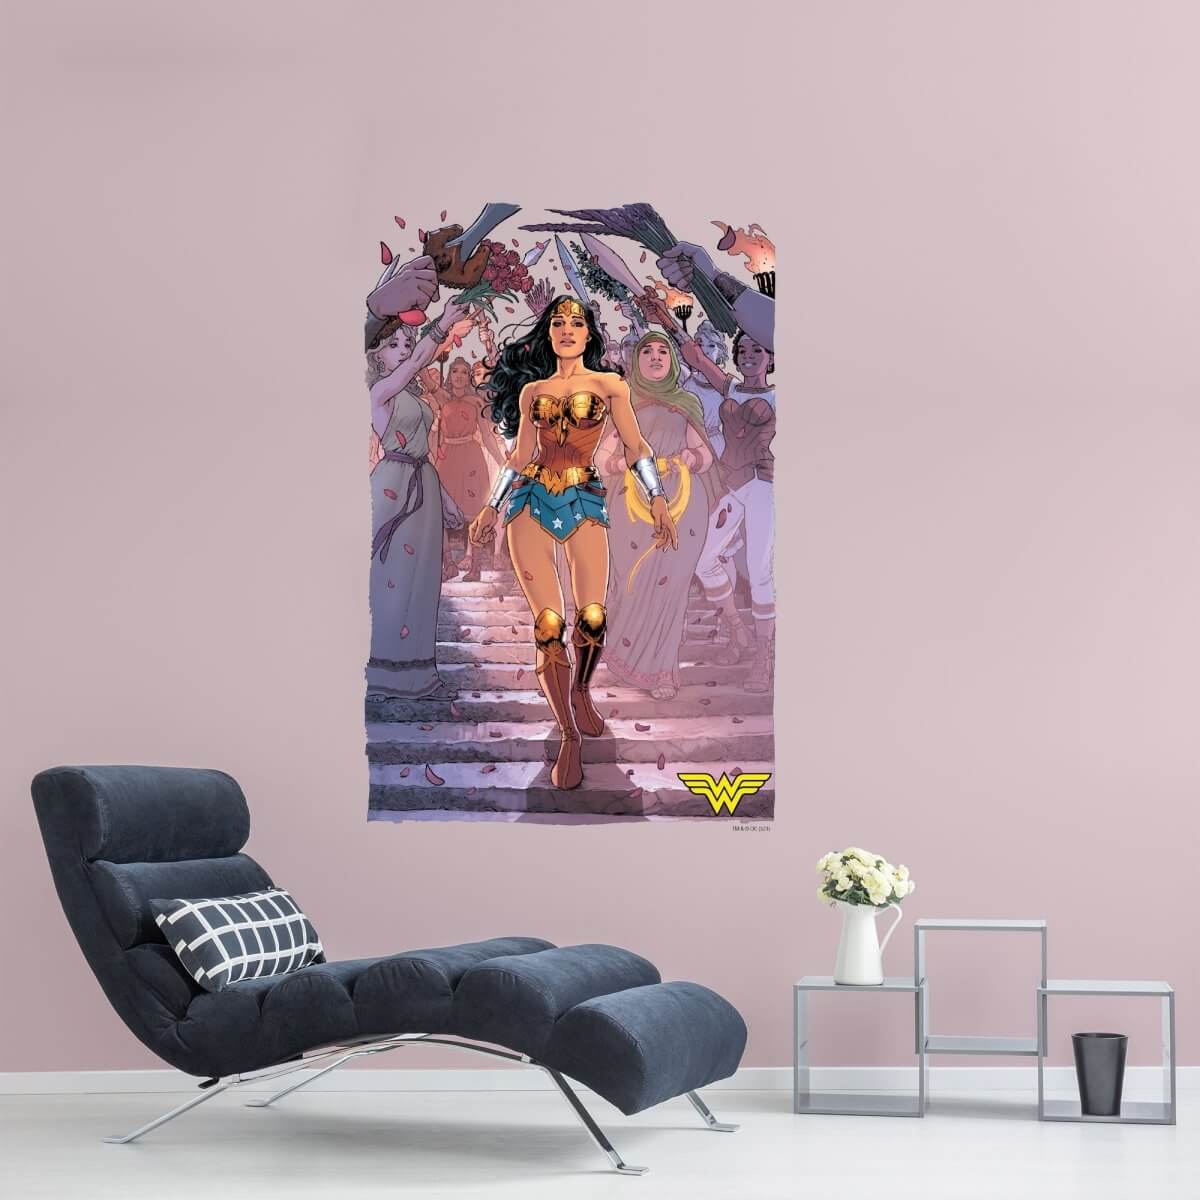 Kismet Decals Wonder Woman Rebirth #4 Pg18 Comic Cover Series Officially Licensed Wall Sticker - Easy DIY DC Comics Home, Kids or Adult Bedroom, Office, Living Room Decor Wall Art - Kismet Decals